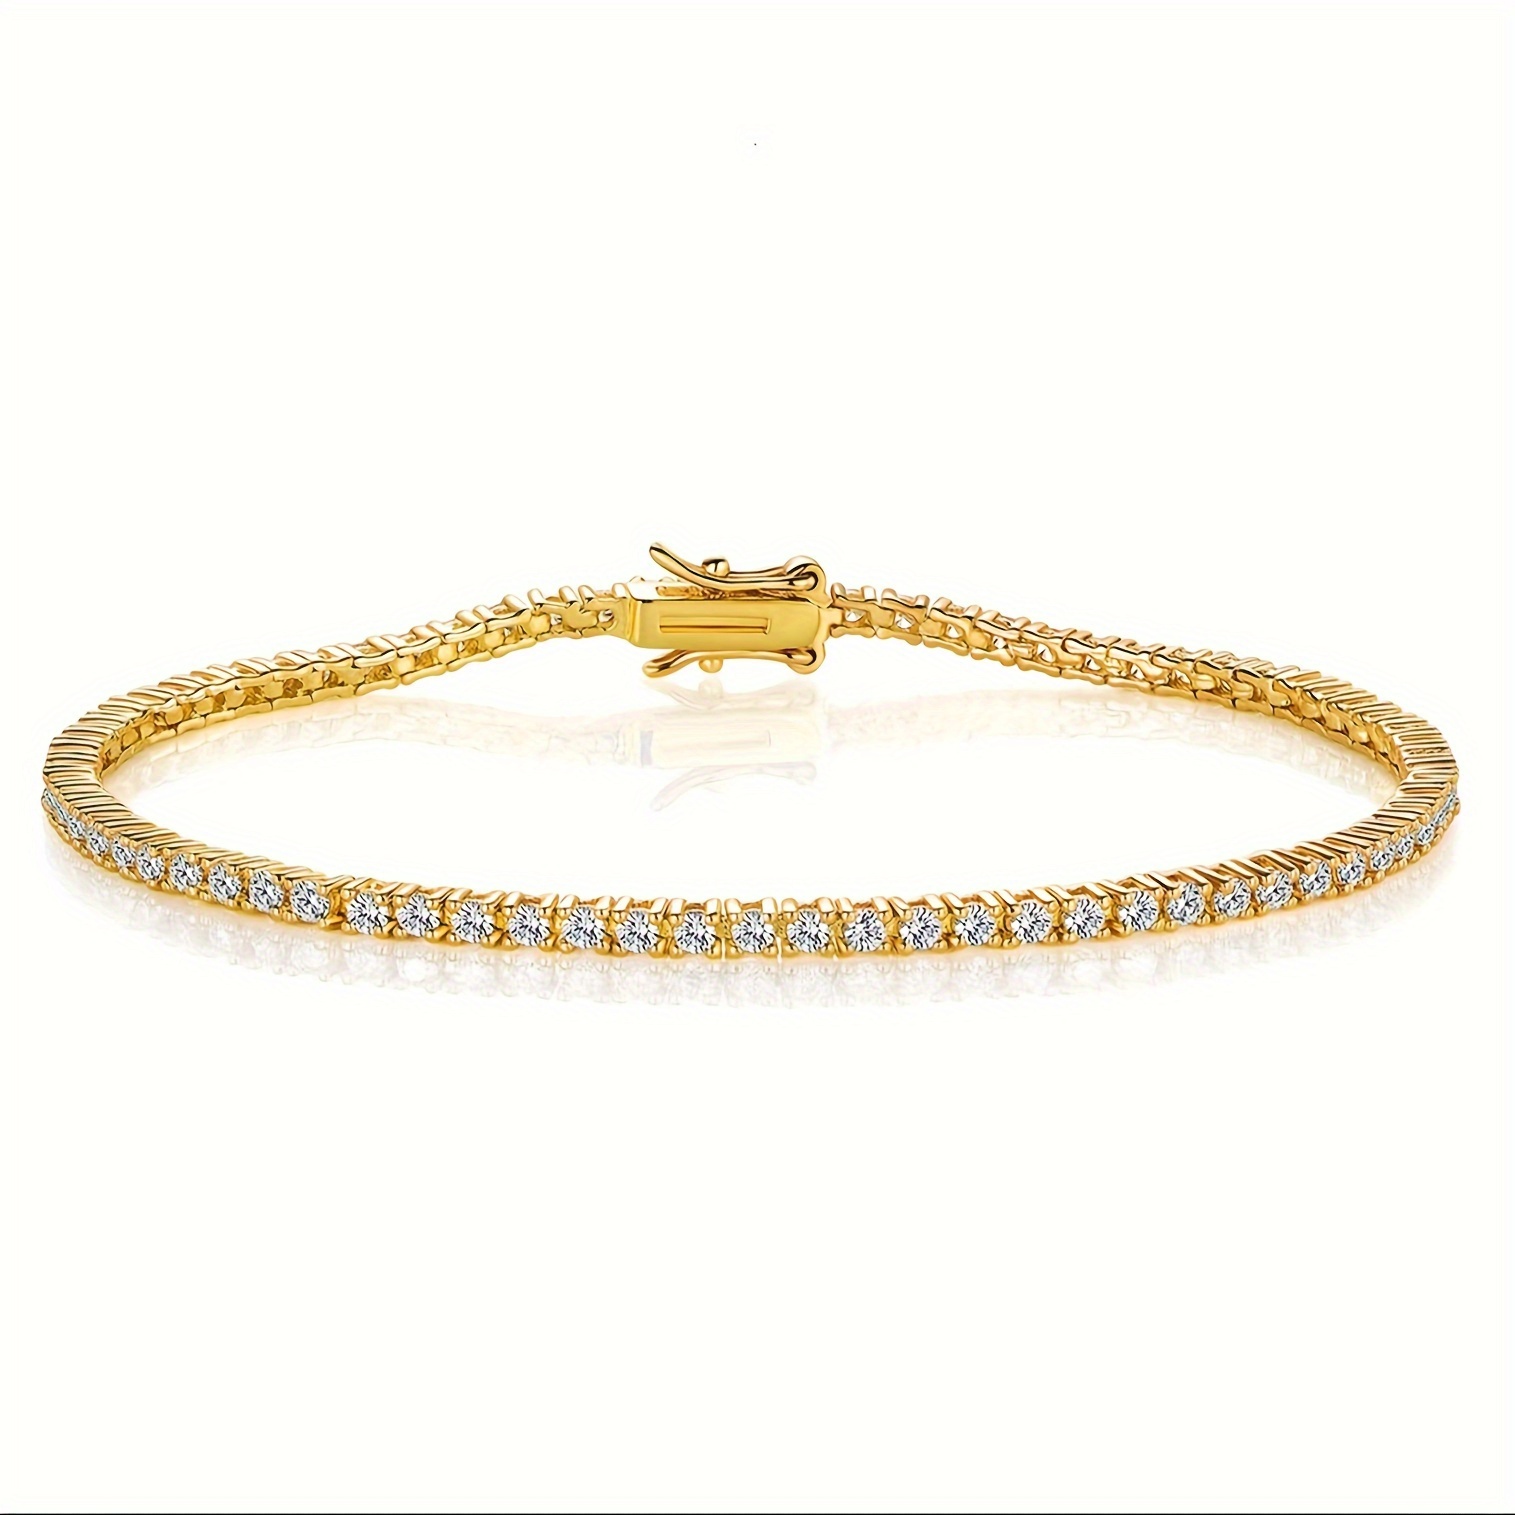 

Elegant & Classic Style, Delicate Tennis Bracelet For Women And Men, Golden Round Bling Cubic Zirconia Classic Tennis Bracelet, Fashion Accessory For Daily Wear